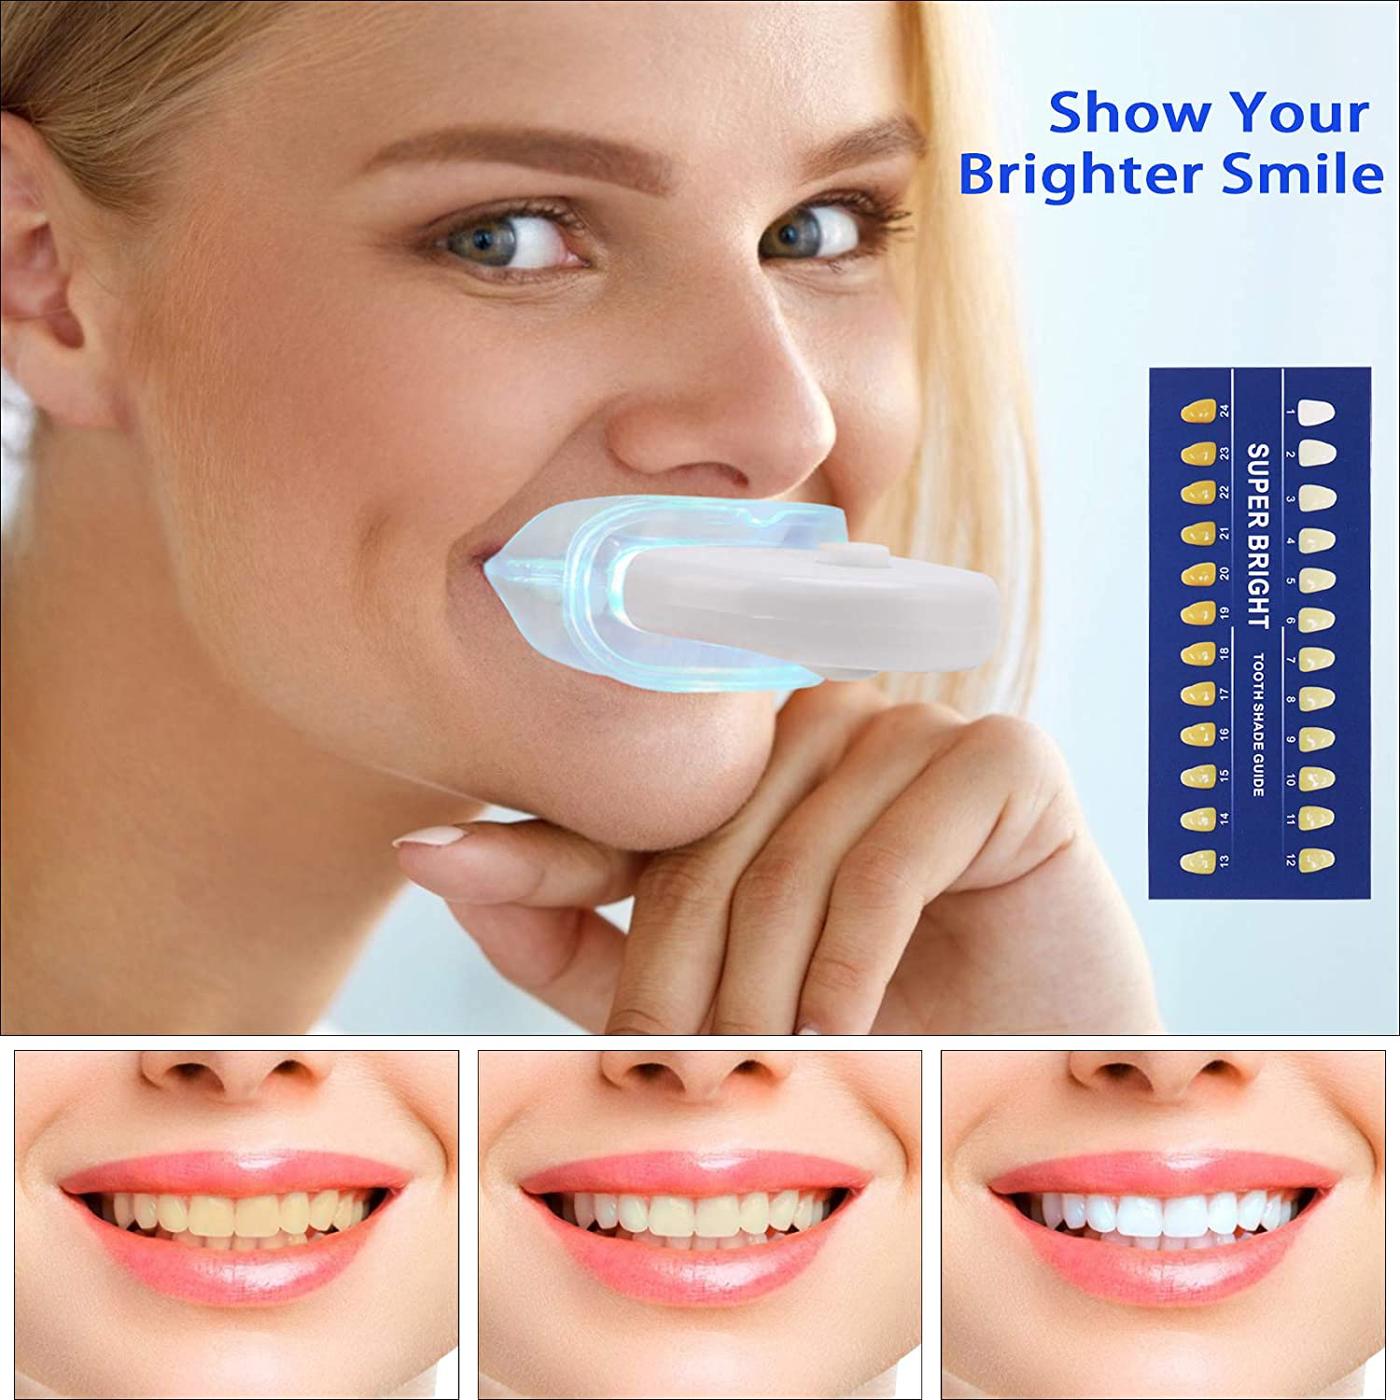 Agoal Teeth Whitening, Teeth Whitening Kit with LED Light, Non-Sensitive Teeth Whitener Pen with Tooth Whitening Gel and Soft Mouth Tray